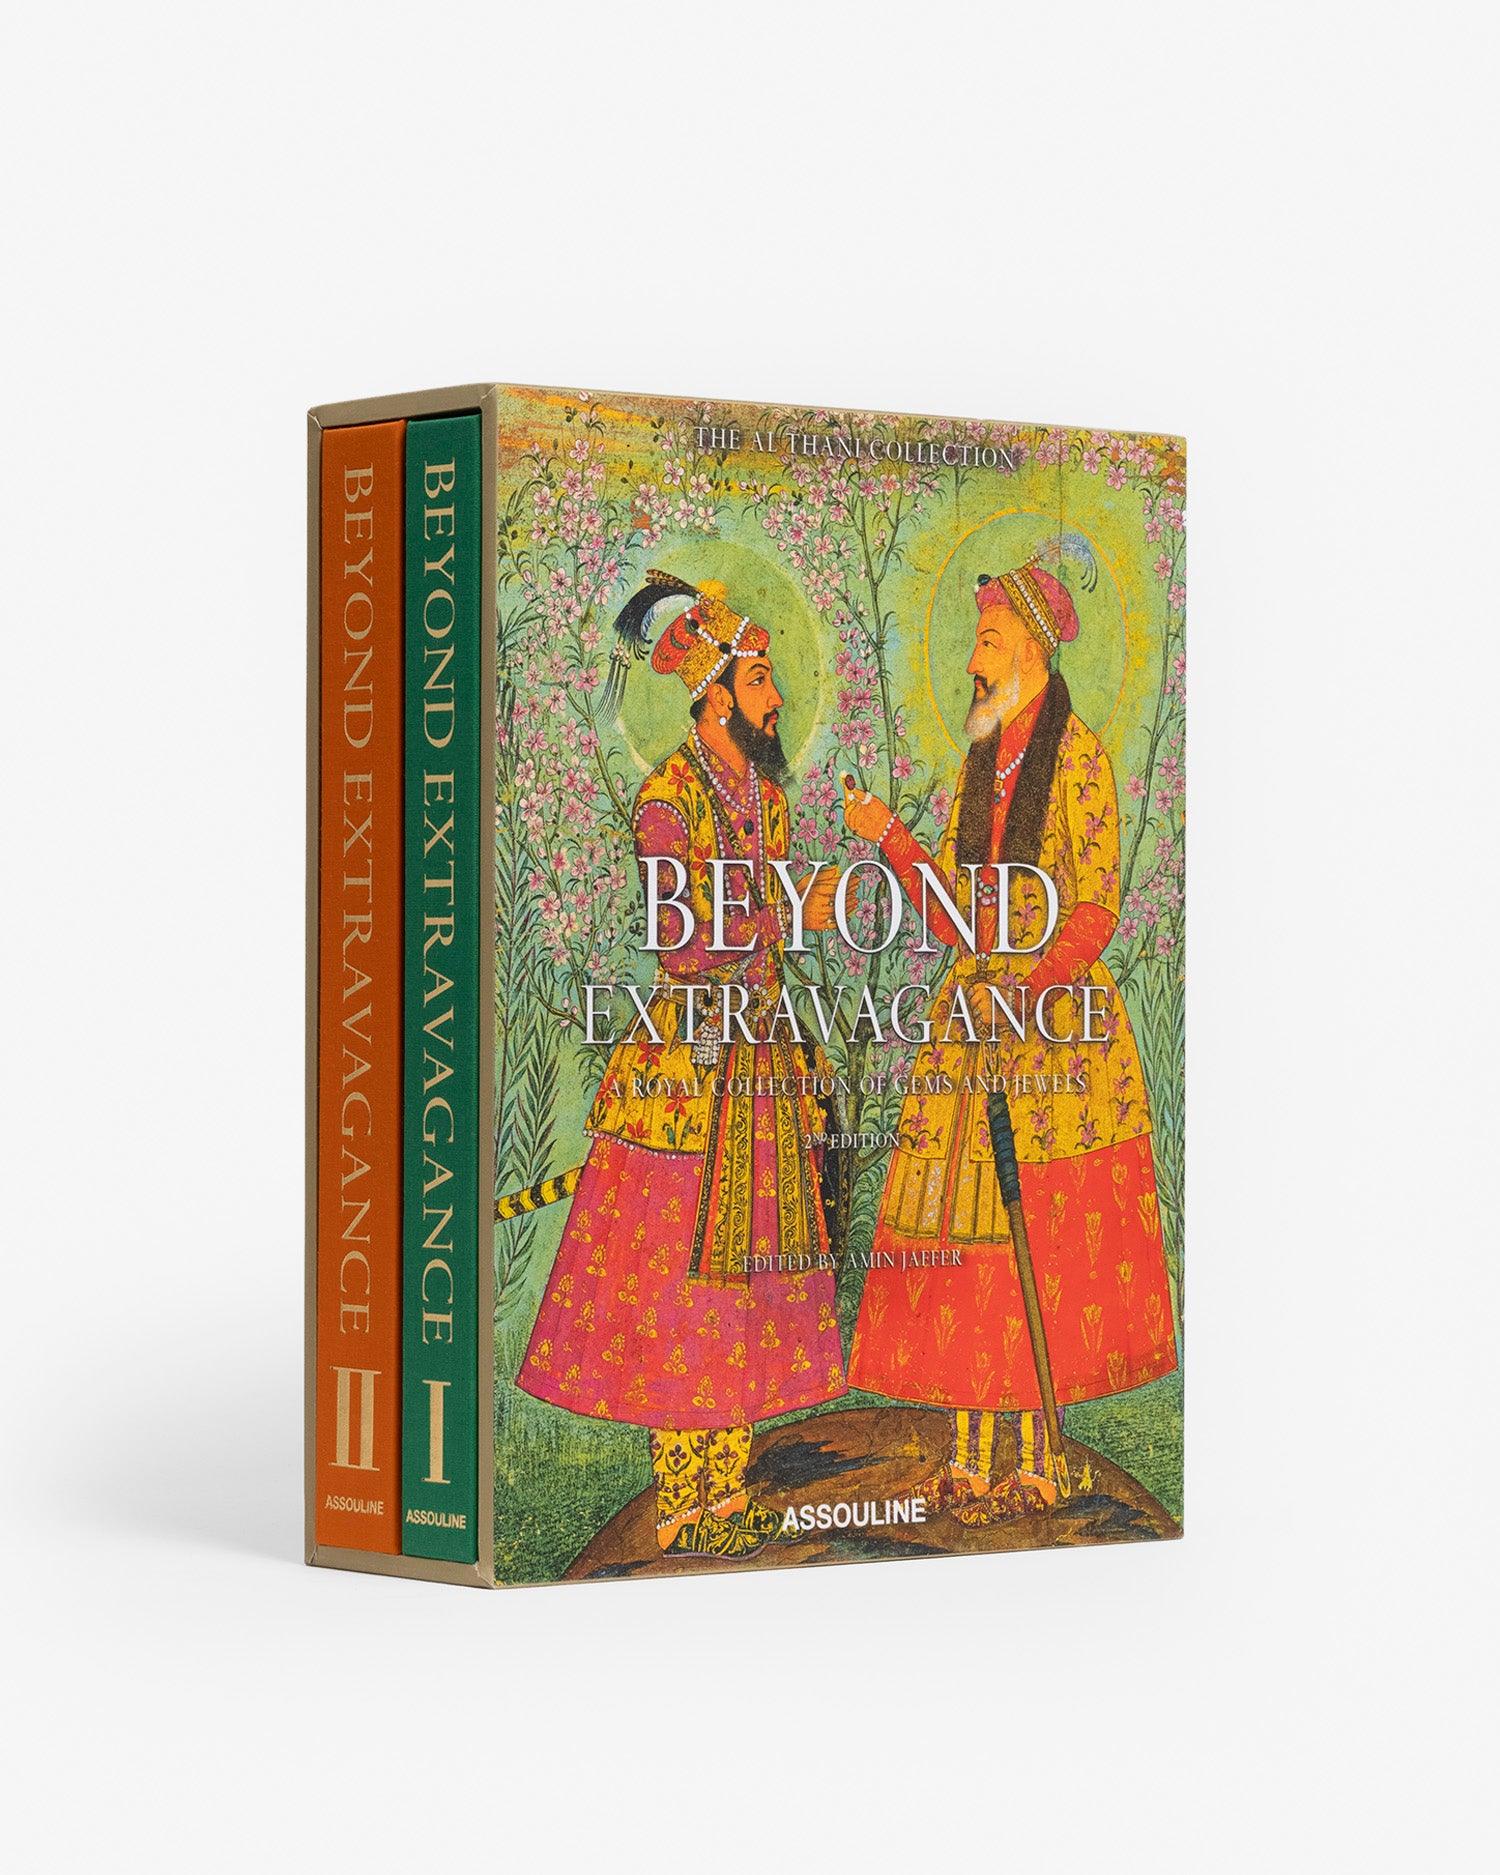 Beyond Extravagance - A Royal Collection of Gems and Jewels (2nd editi